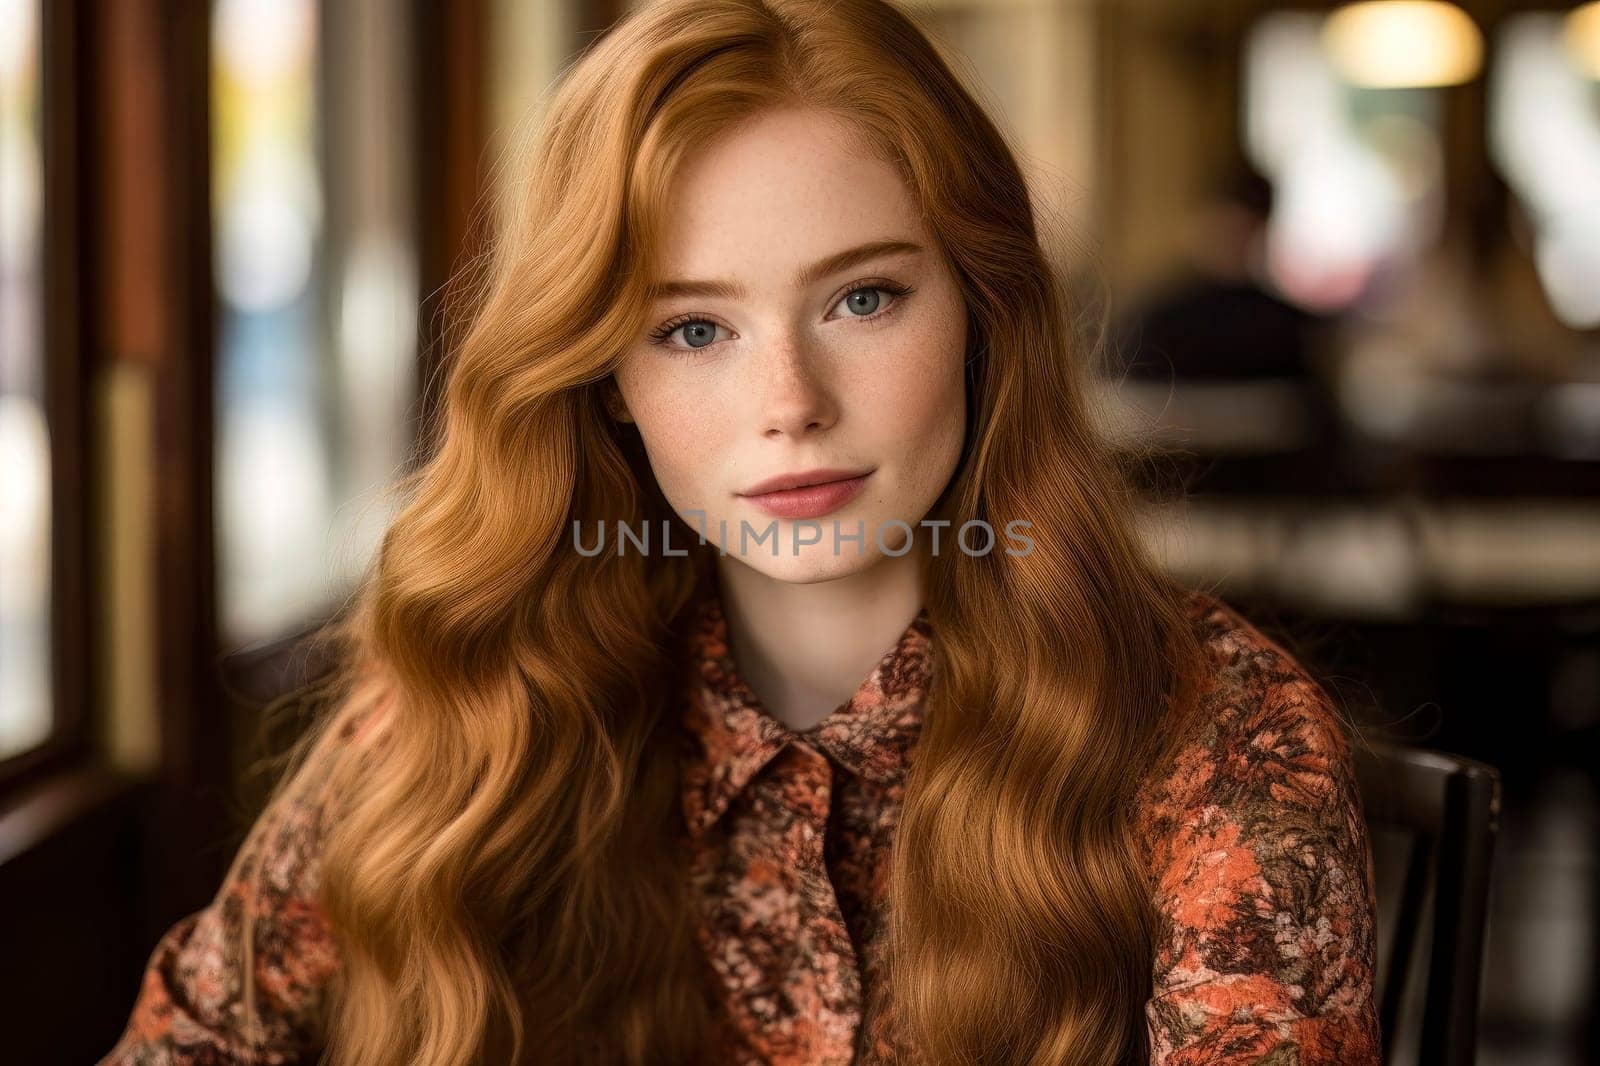 Captivating Portrait of a Charming Redhead by pippocarlot